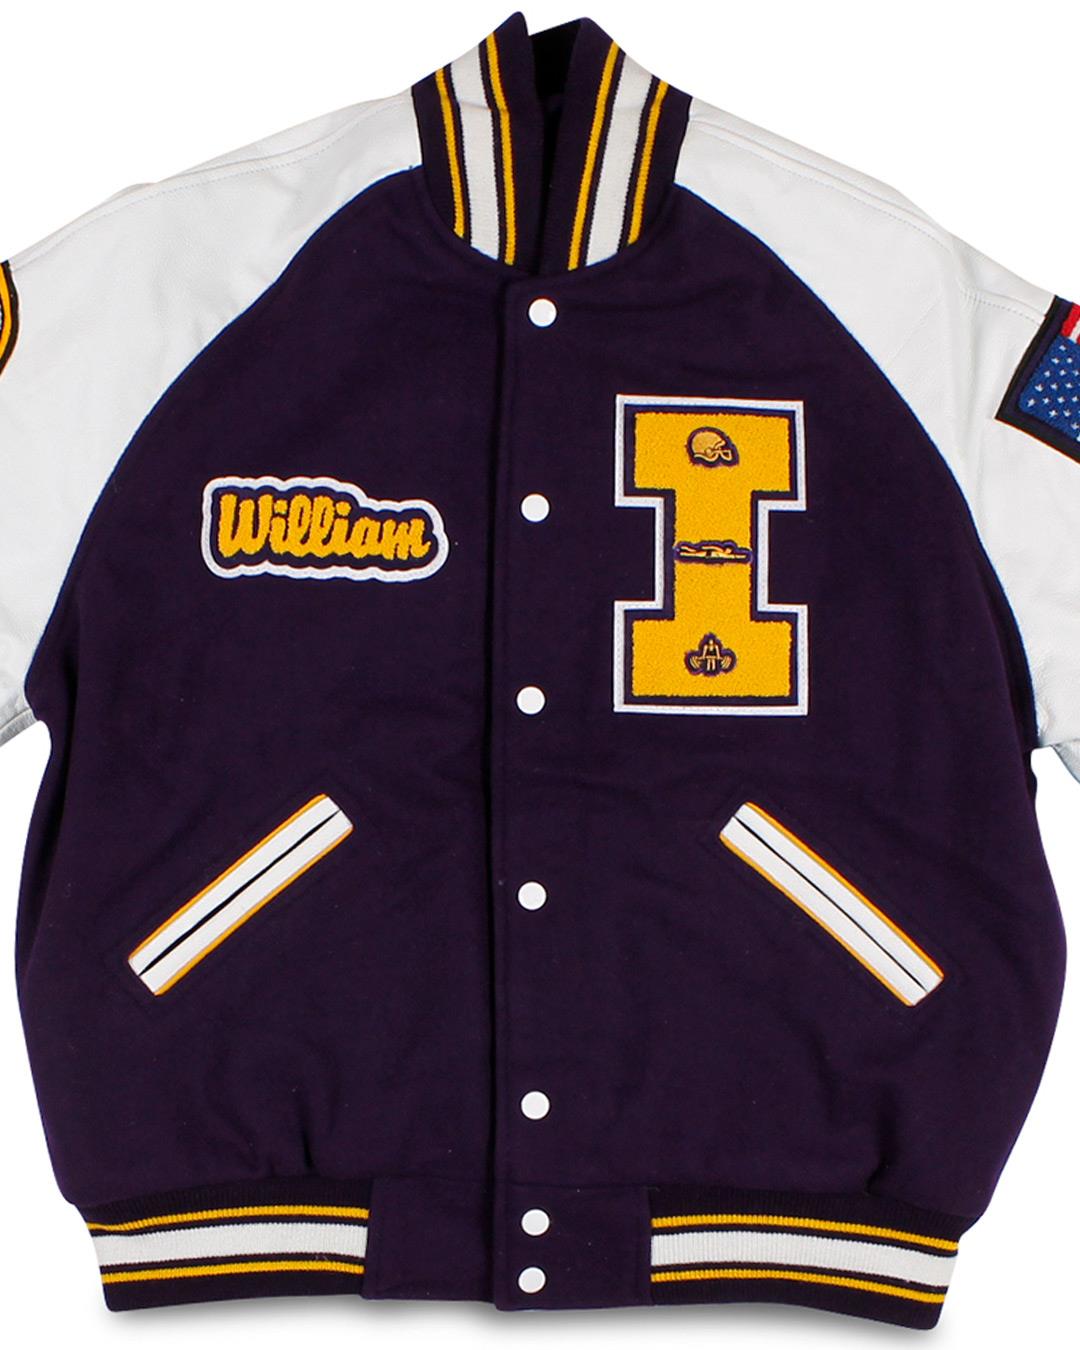 Issaquah High School Letter Jacket, Issaquah WA - Front